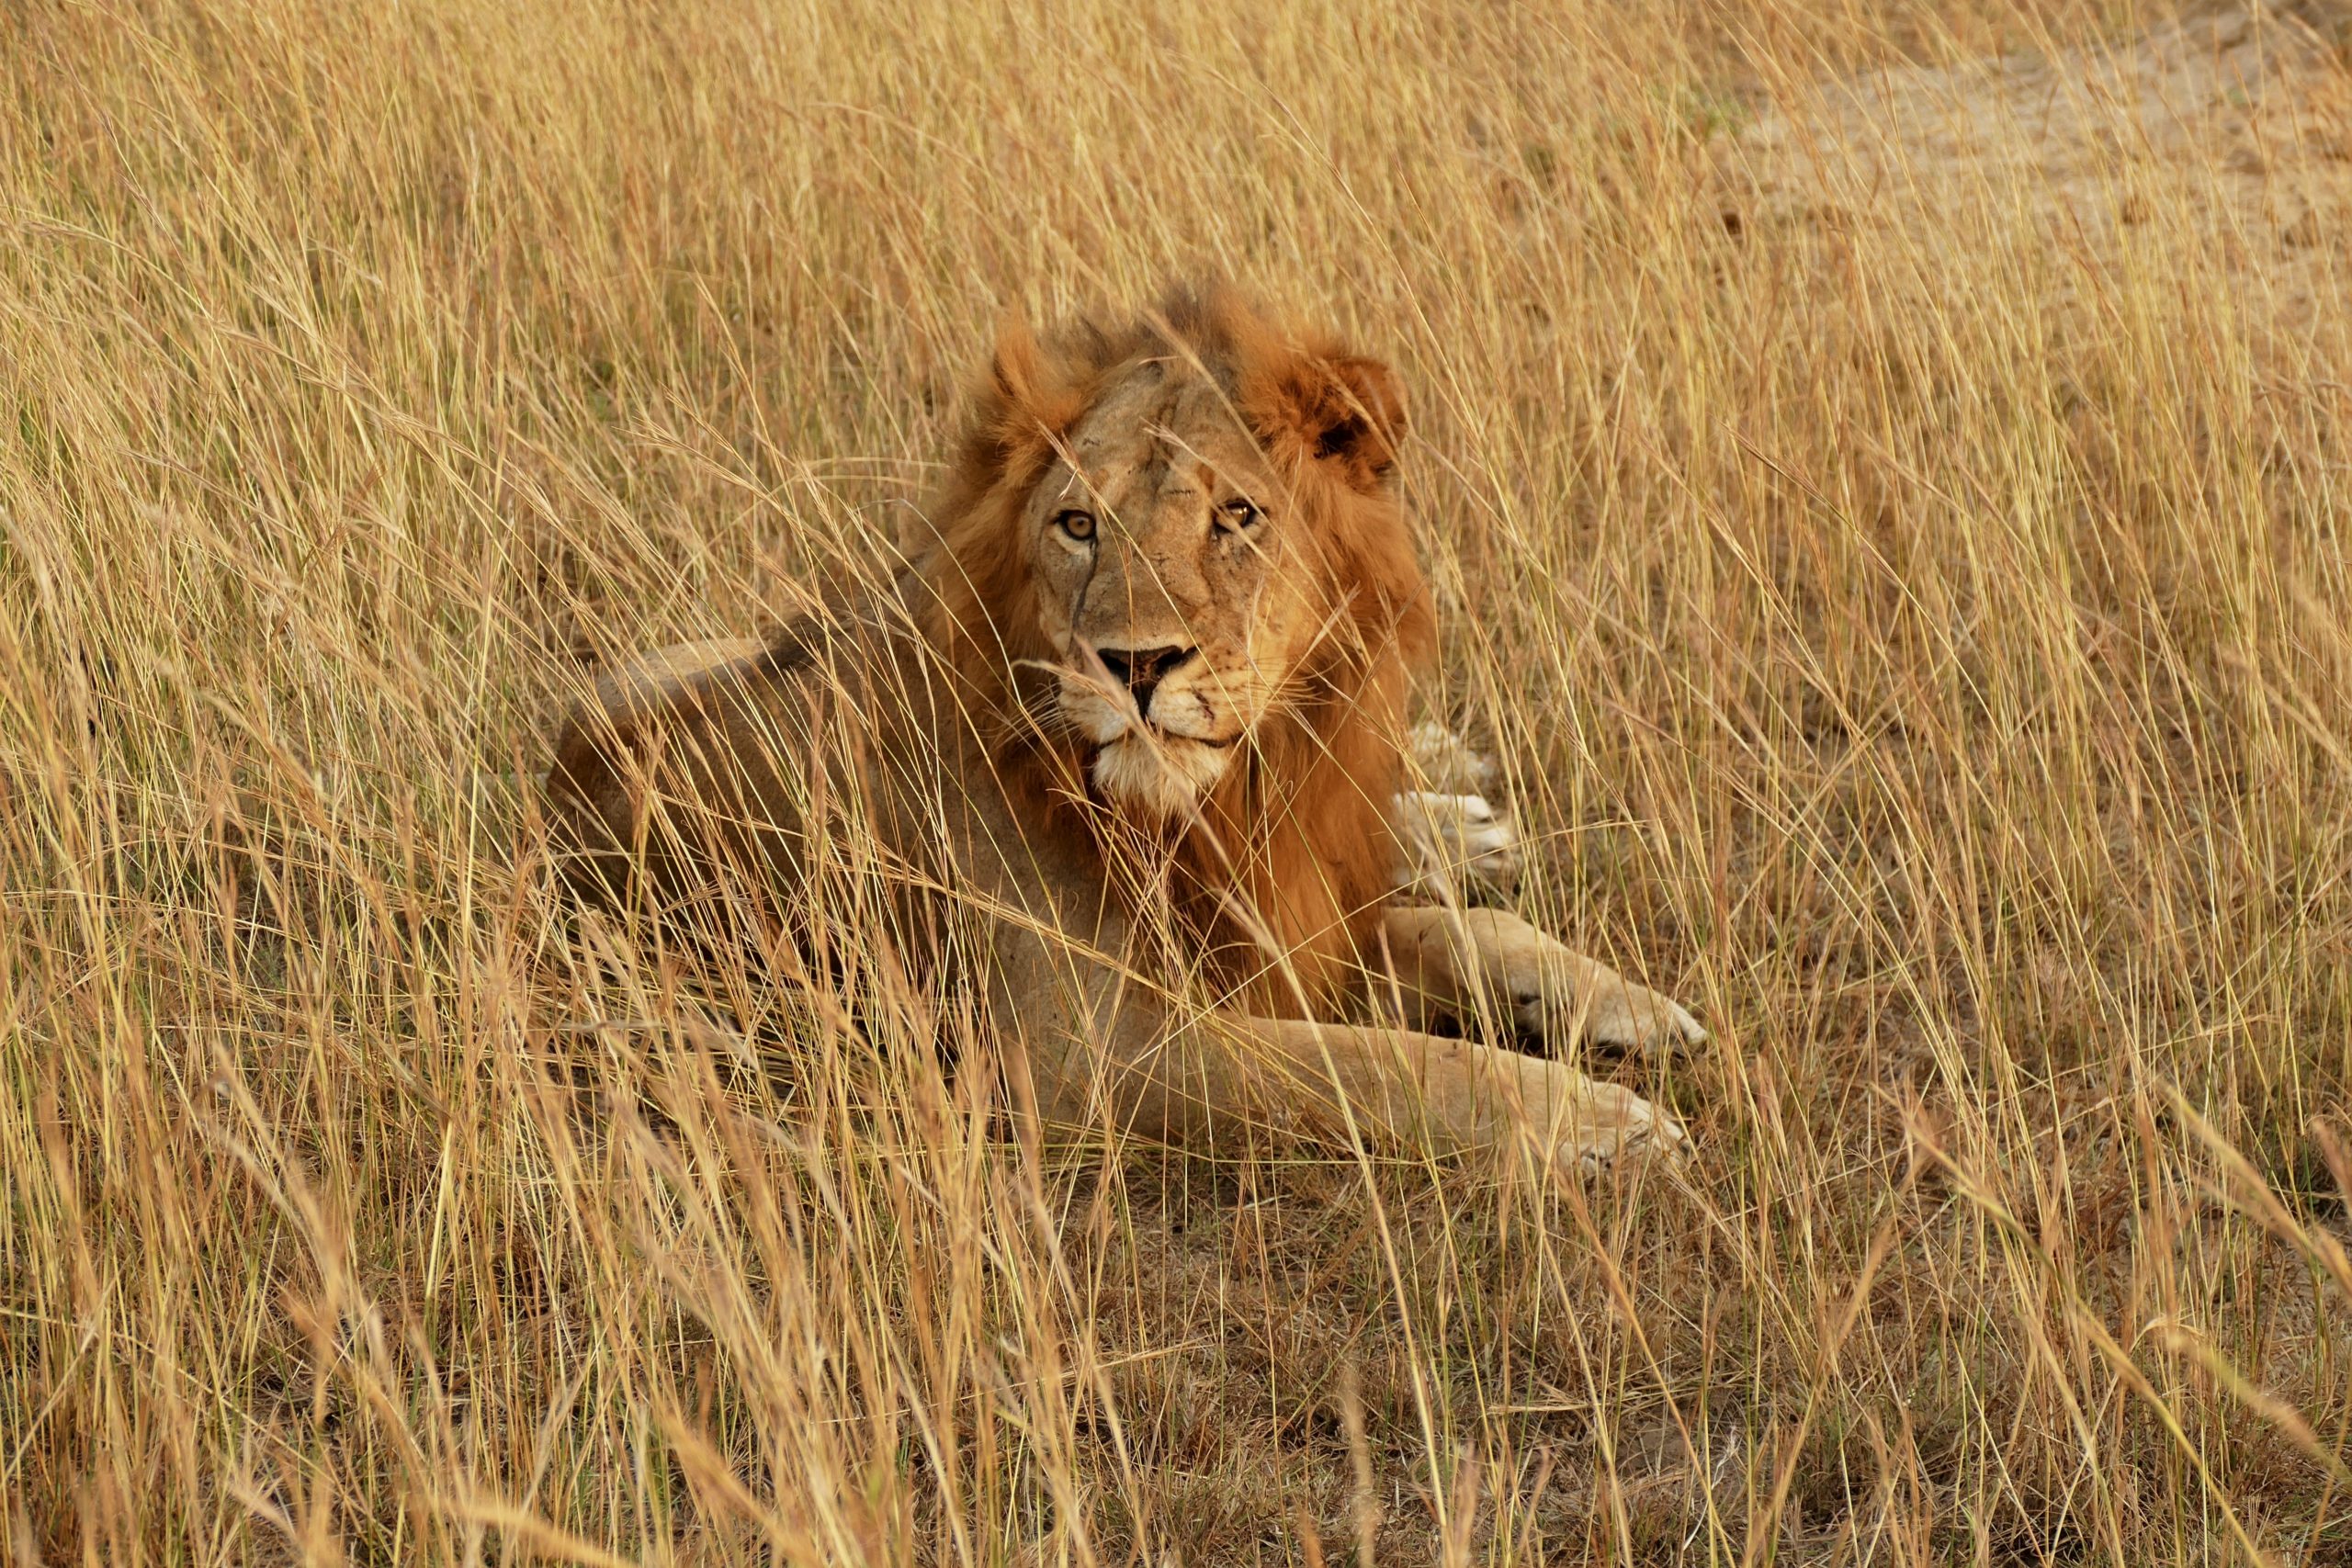 Kidepo valley national Park